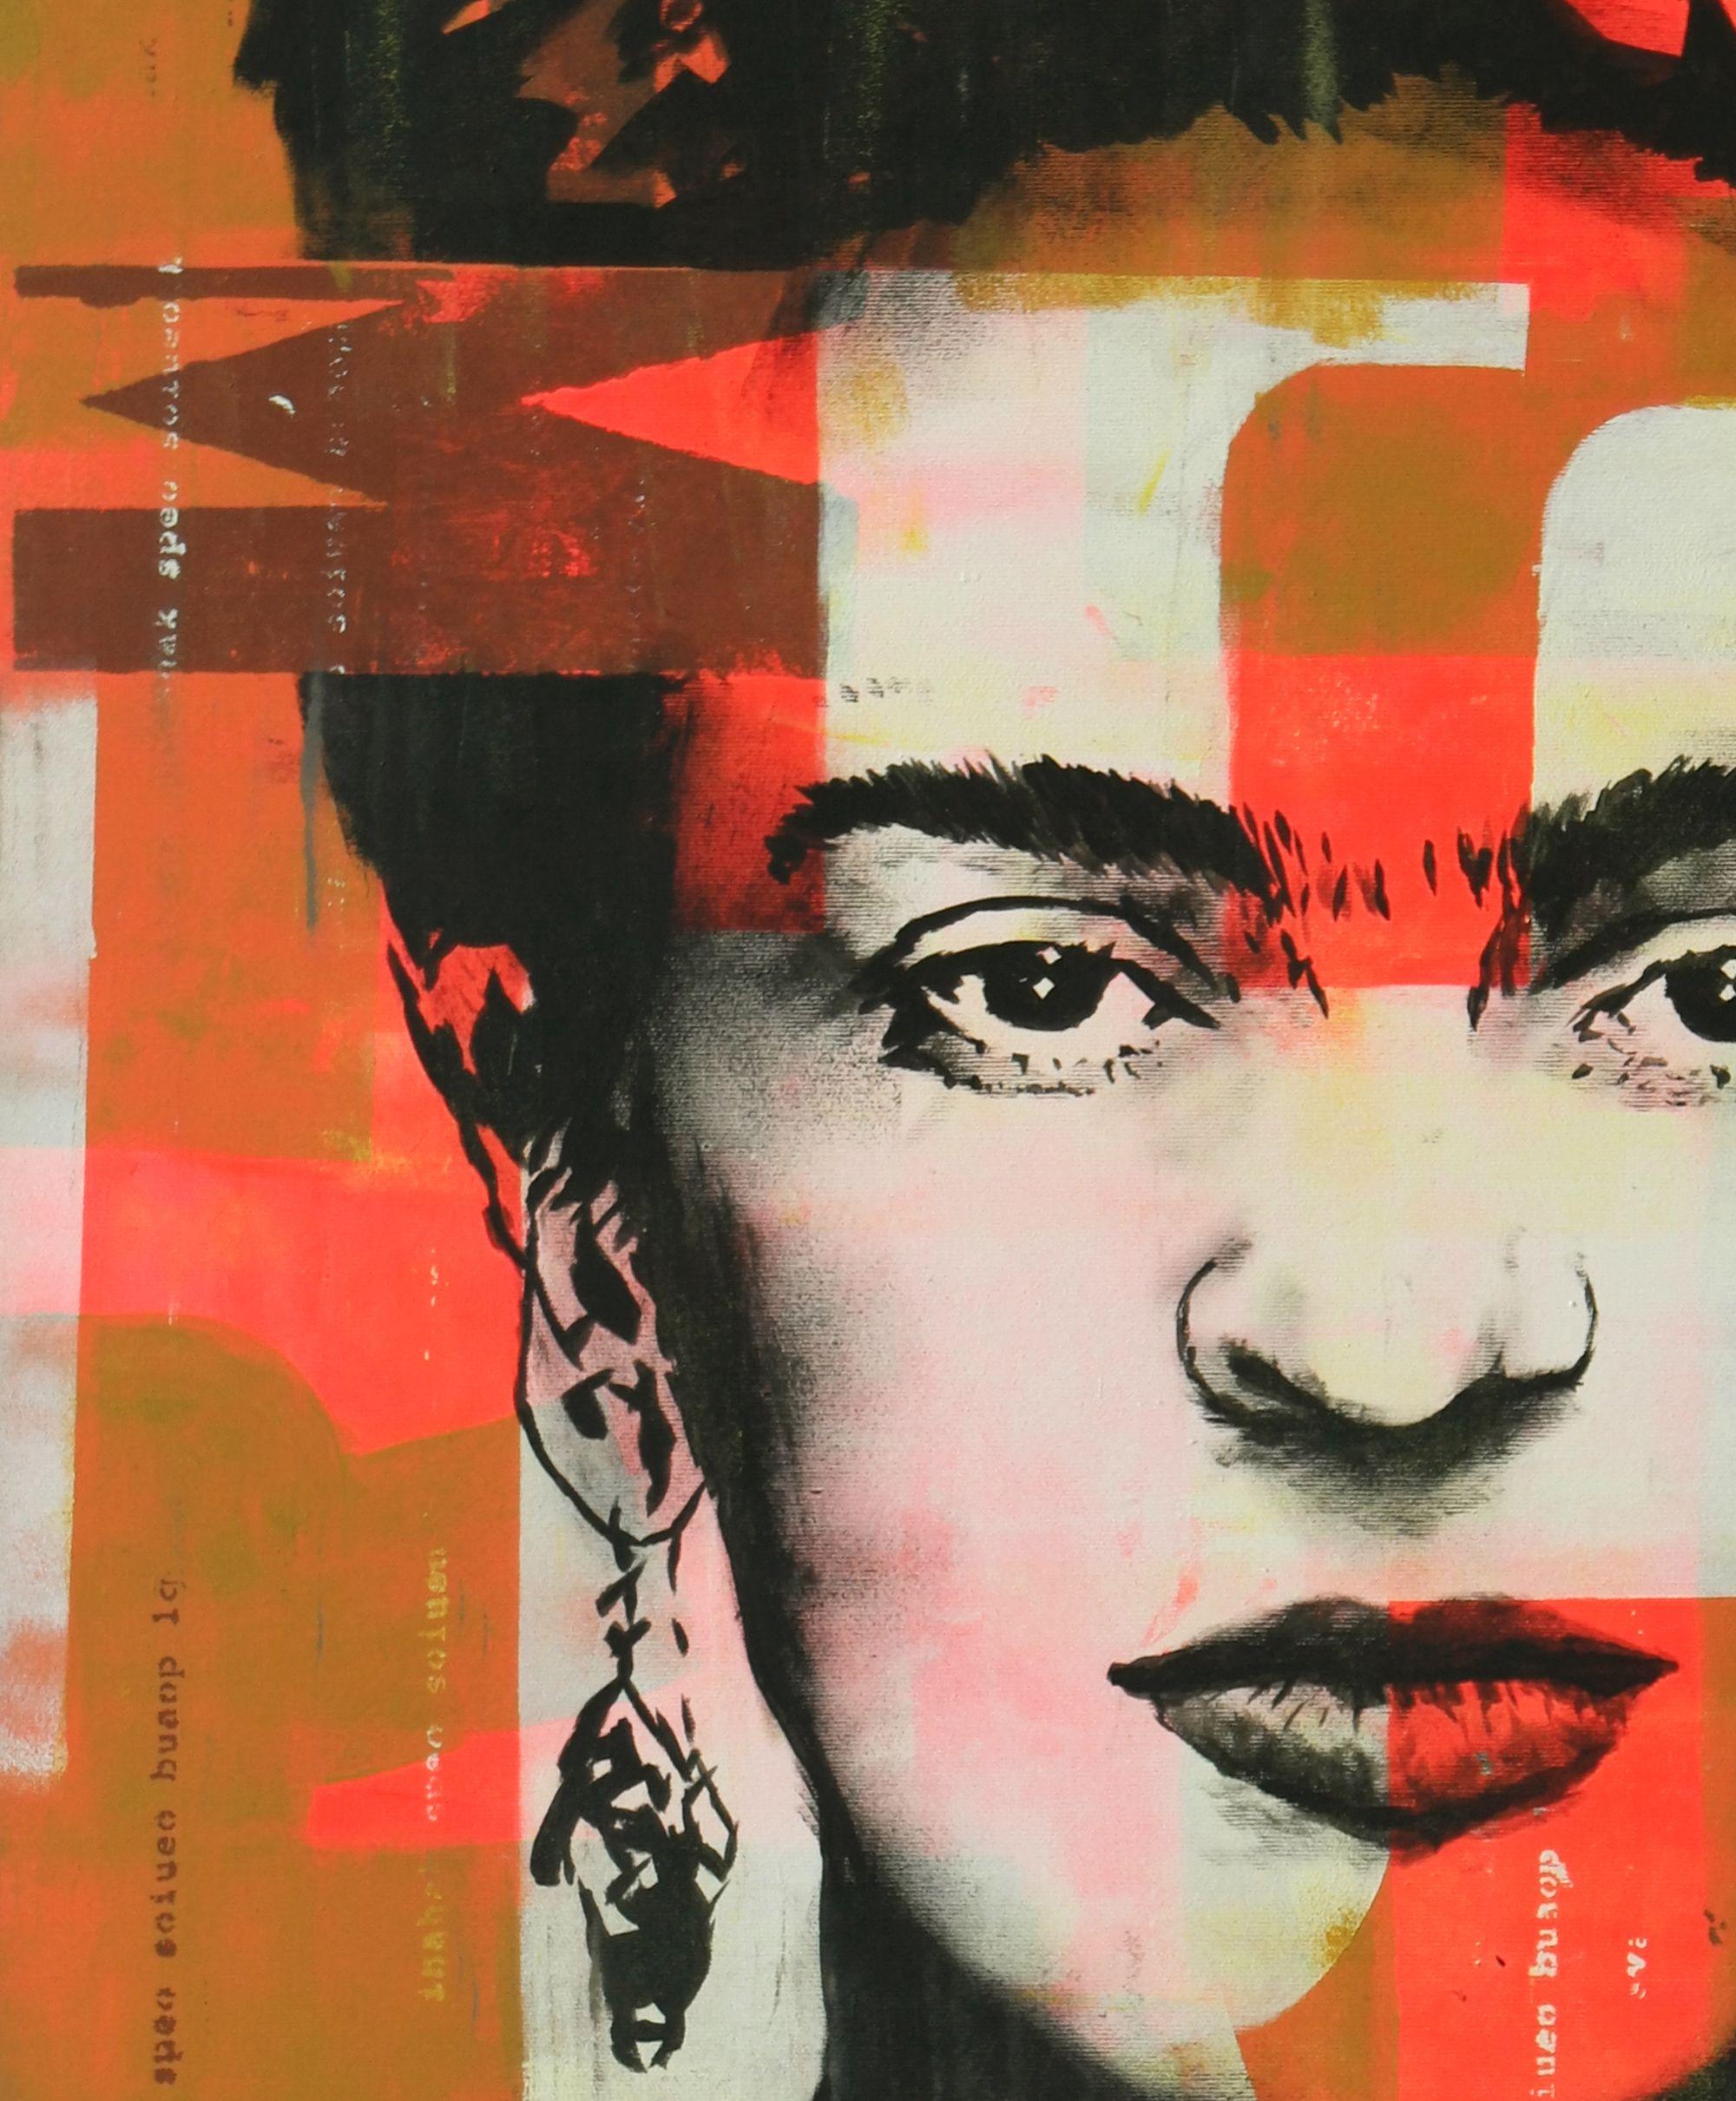 The famous Frida Kahlo, as she has never been portrayed before. Ronald mixed her portrait with typographic form. Combined with the neon orange and gold brown color palette, this painting is a vibrant statement piece. :: Painting :: Pop-Art :: This